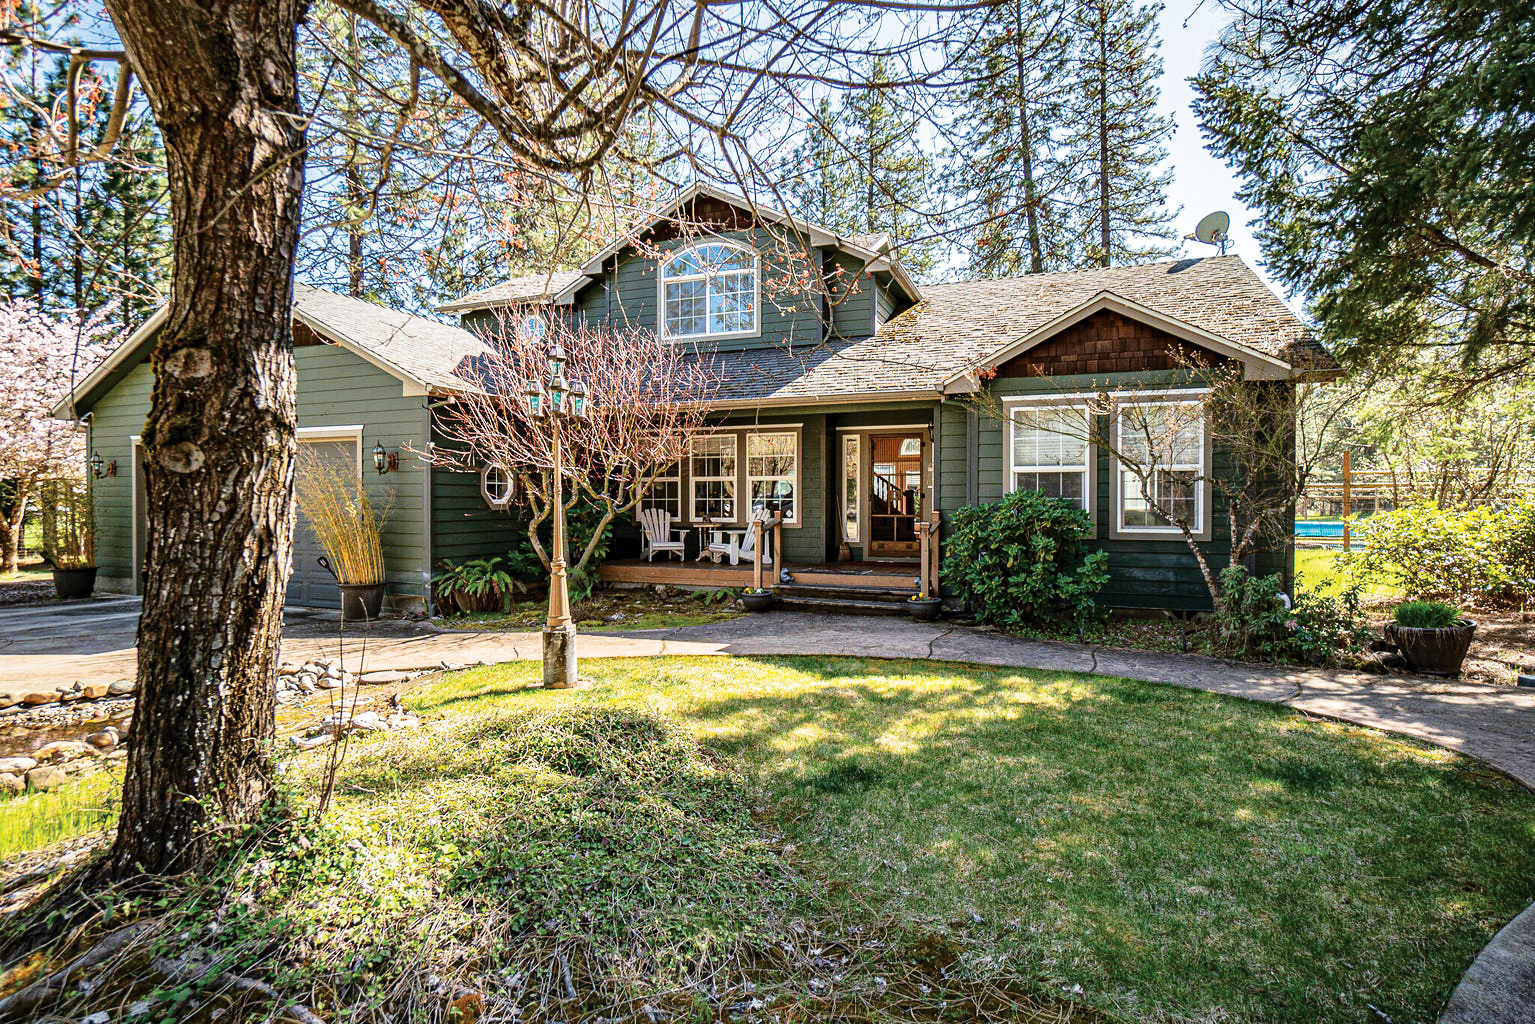 220177315, Charming Home Located on  3+ Fenced and Gated Acres. 7888 Redthorne Road, Rogue River, OR 97537, #220177315